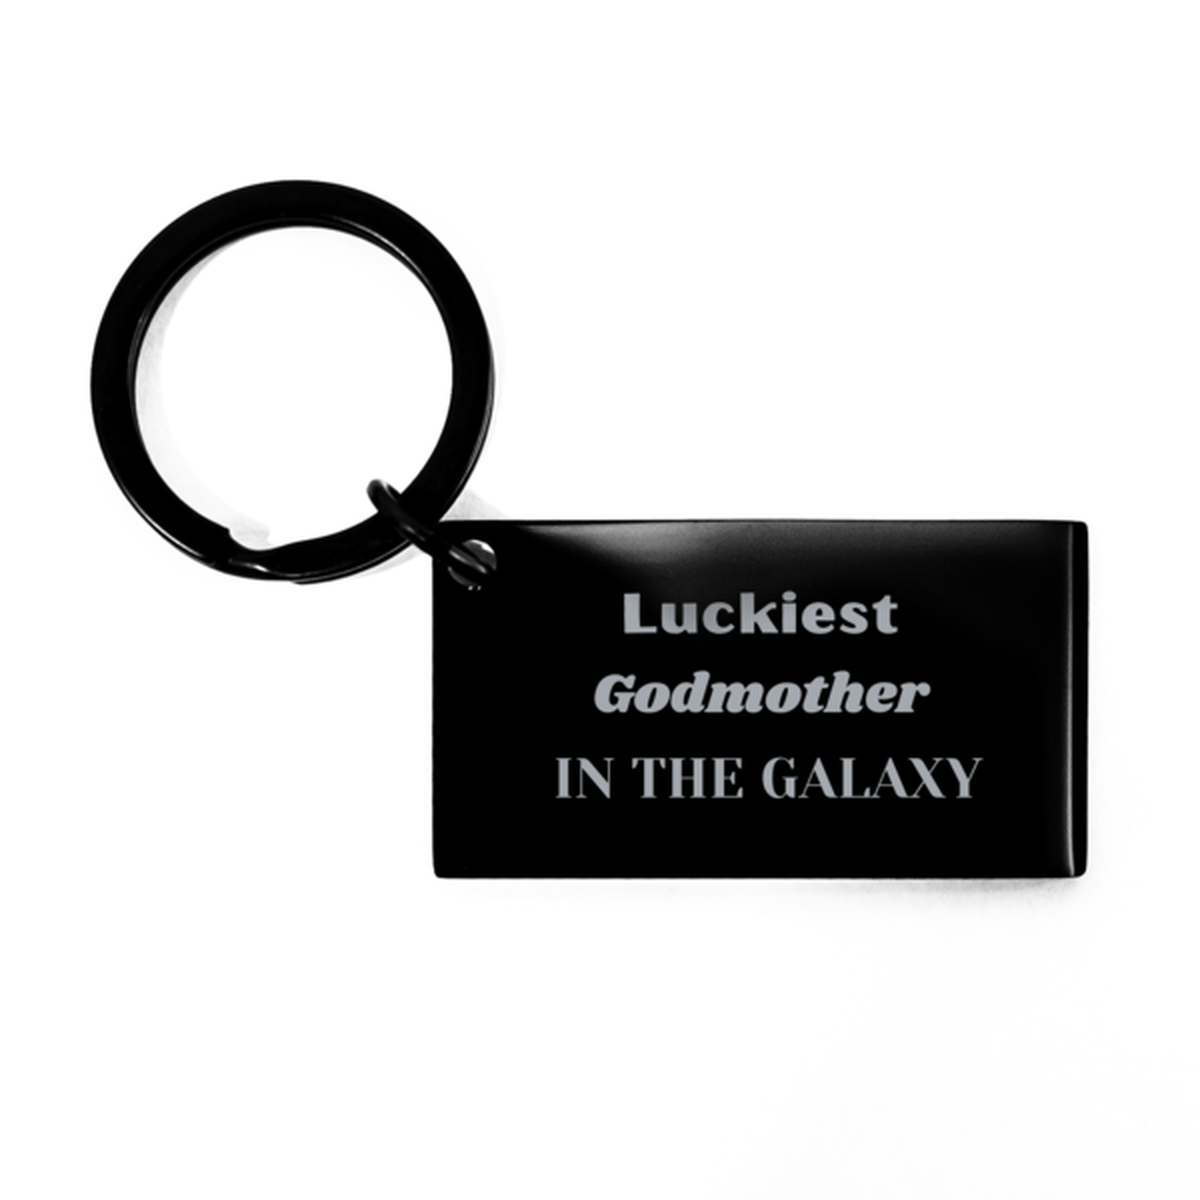 Luckiest Godmother in the Galaxy, To My Godmother Engraved Gifts, Christmas Godmother Keychain Gifts, X-mas Birthday Unique Gifts For Godmother Men Women